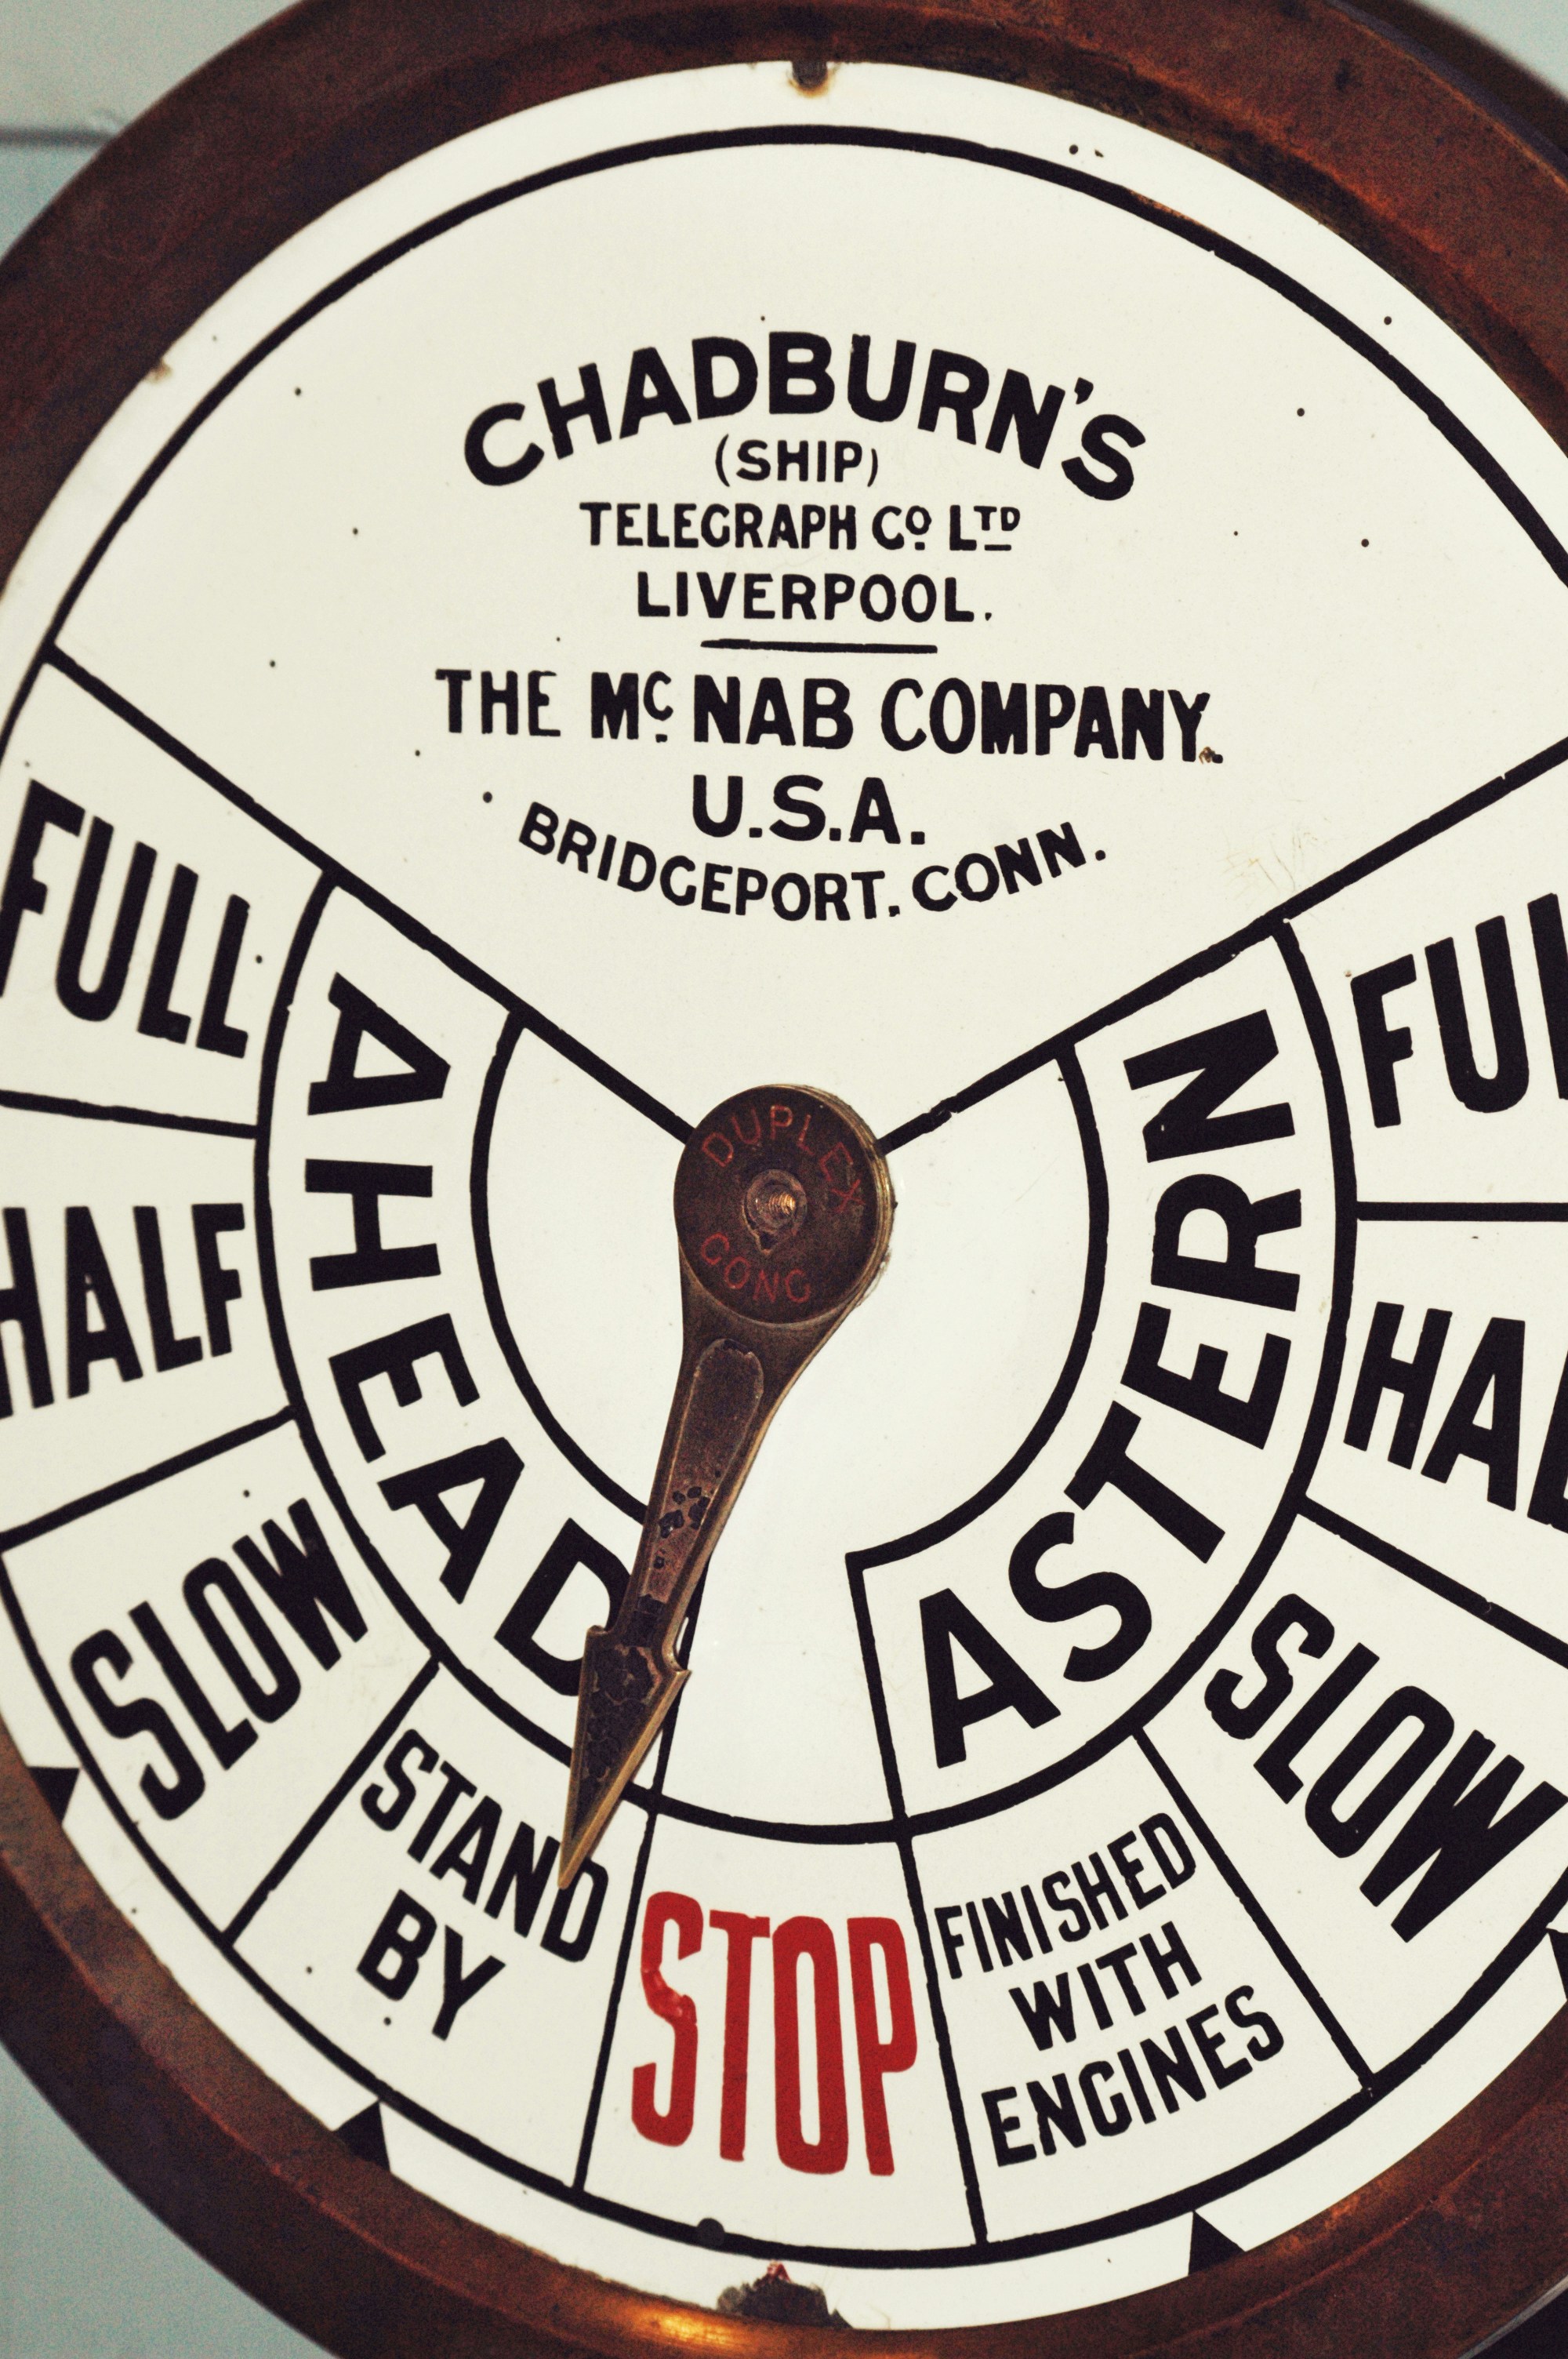 Detail shot of a ship or vessel's propulsion system, filled with large text print and words giving speed readouts. Patina covers the metal round dial and needle.